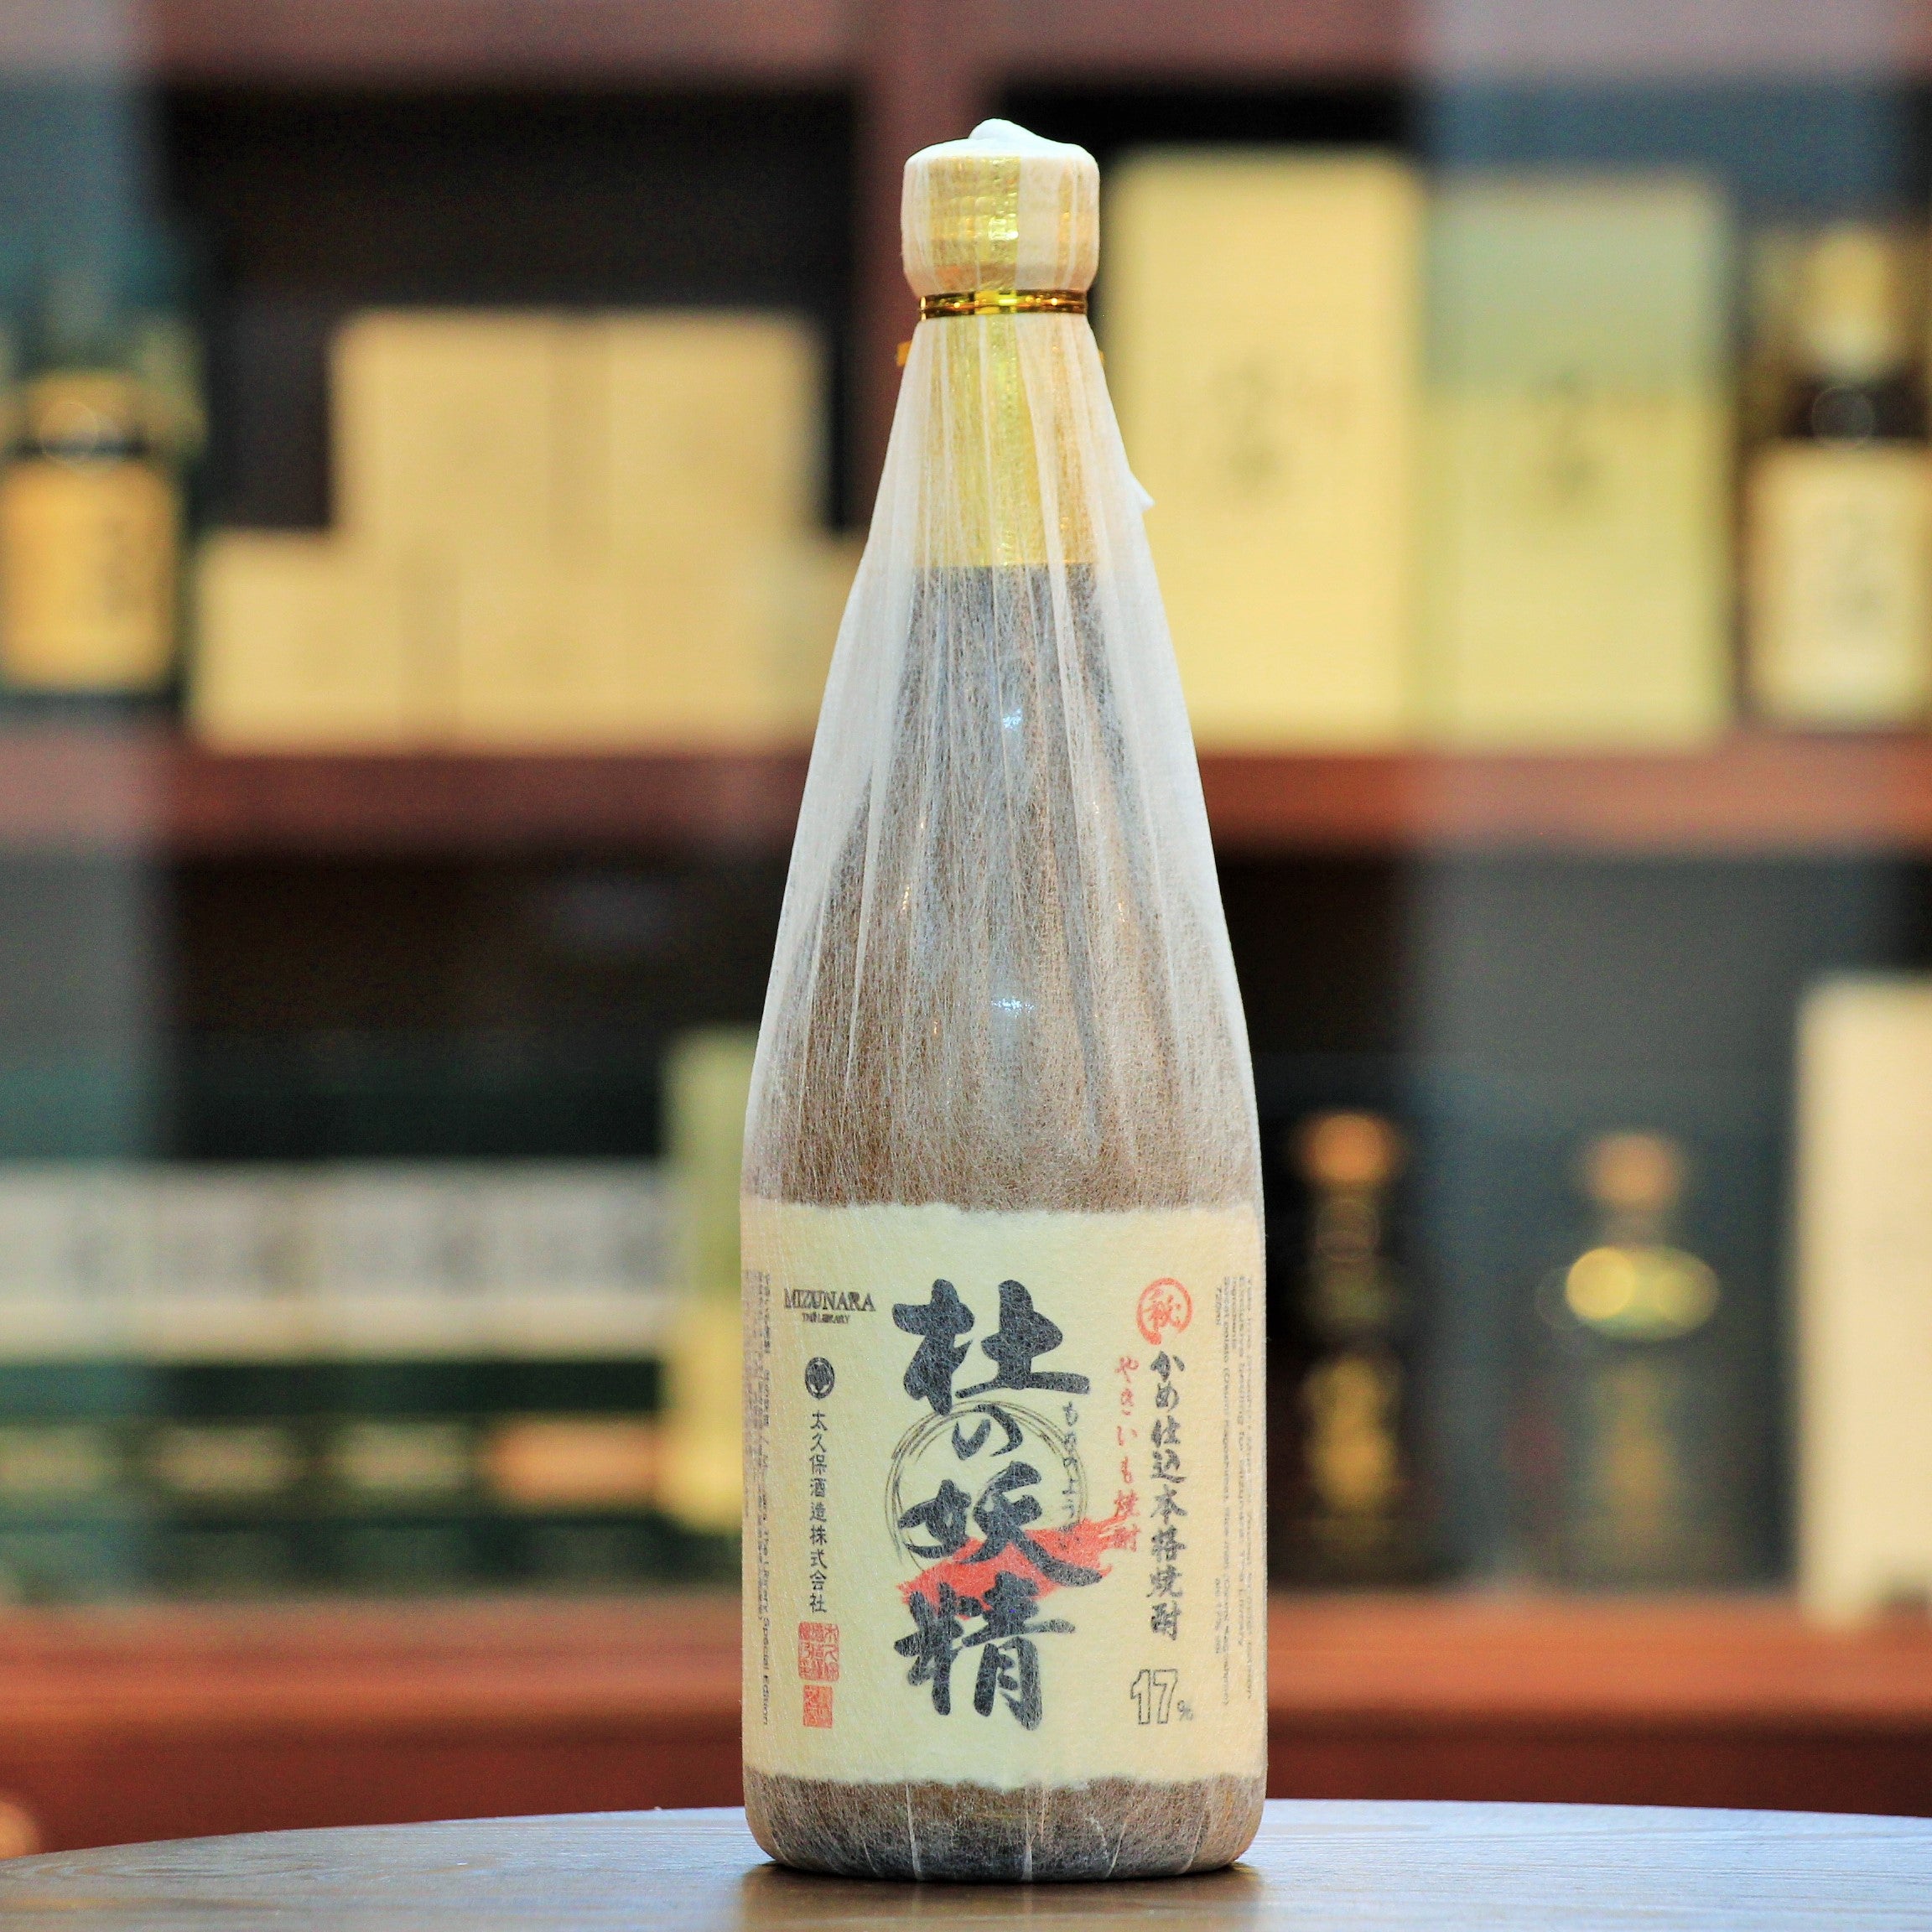 Yaki Imo (Grilled Sweet Potato) Shochu ABV 17% Mizunara Special Edition, Special and Limited edition bottling for Mizunara: The Library. Available only in Hong Kong. Given the lower ABV, this is meant to consumed similar to white wine after being chilled.